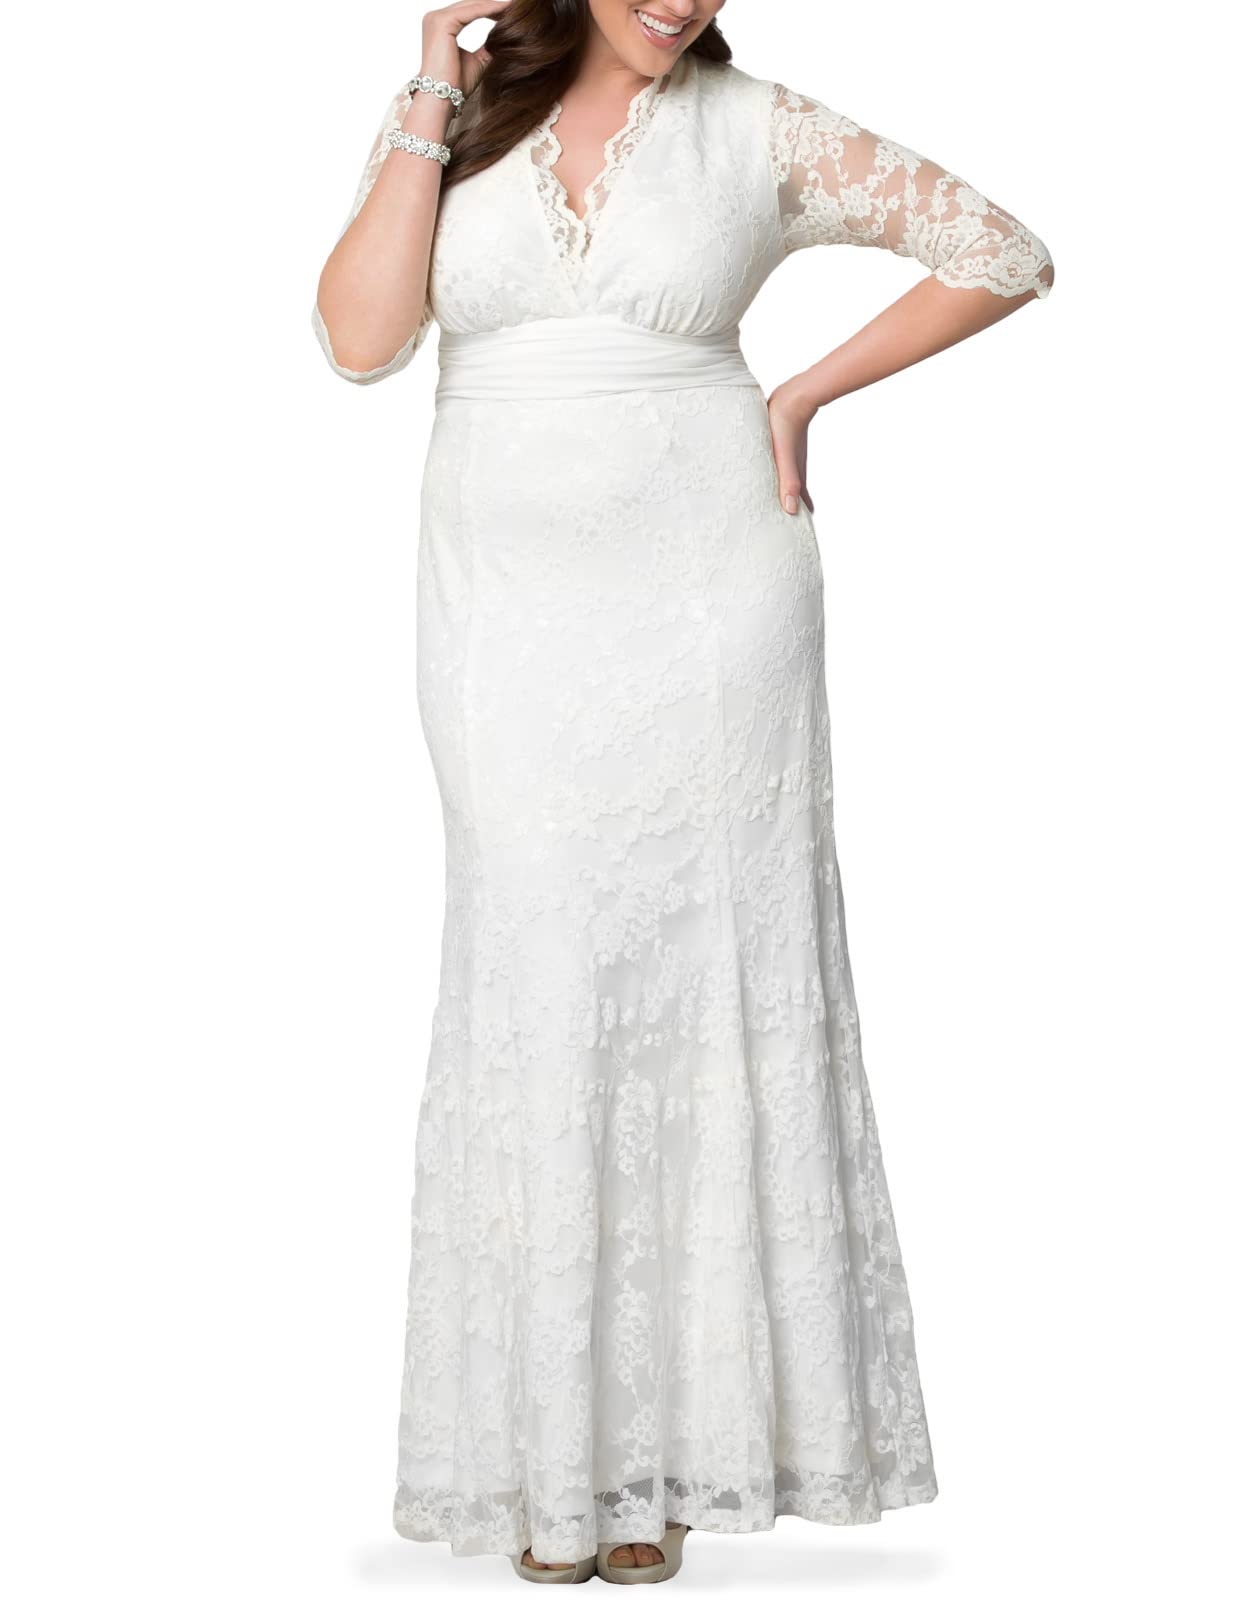 Kiyonna Women's Plus Size Amour Long Lace Wedding Gown, Bridal Dress with 3/4 Long Sleeves in Ivory Vintage-Inspired Lace